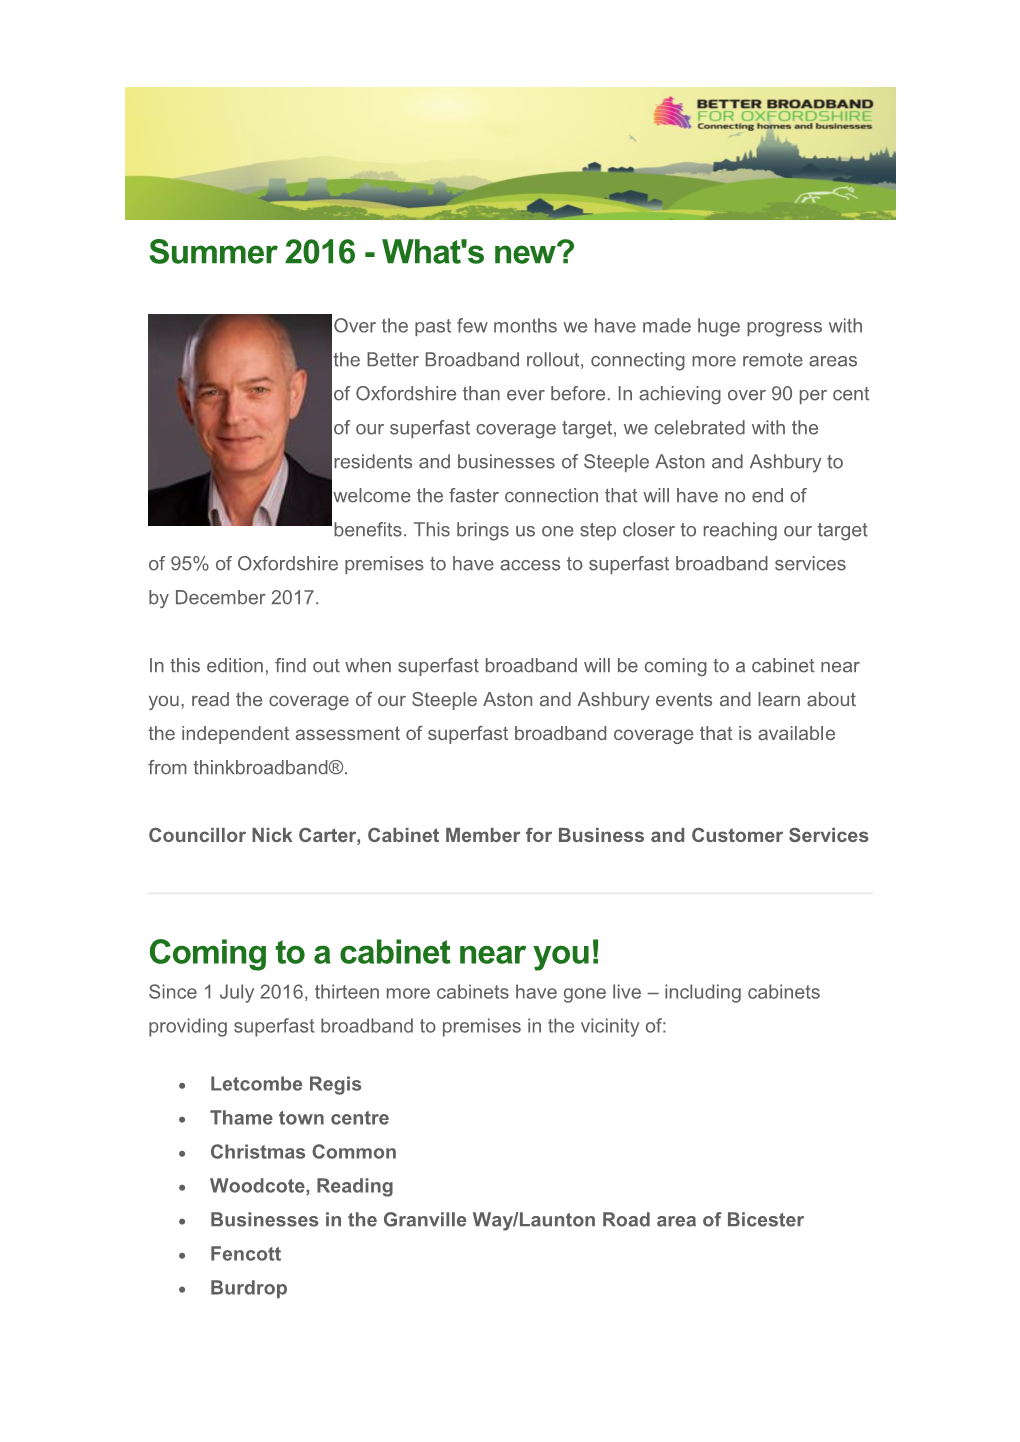 Summer 2016 - What's New?